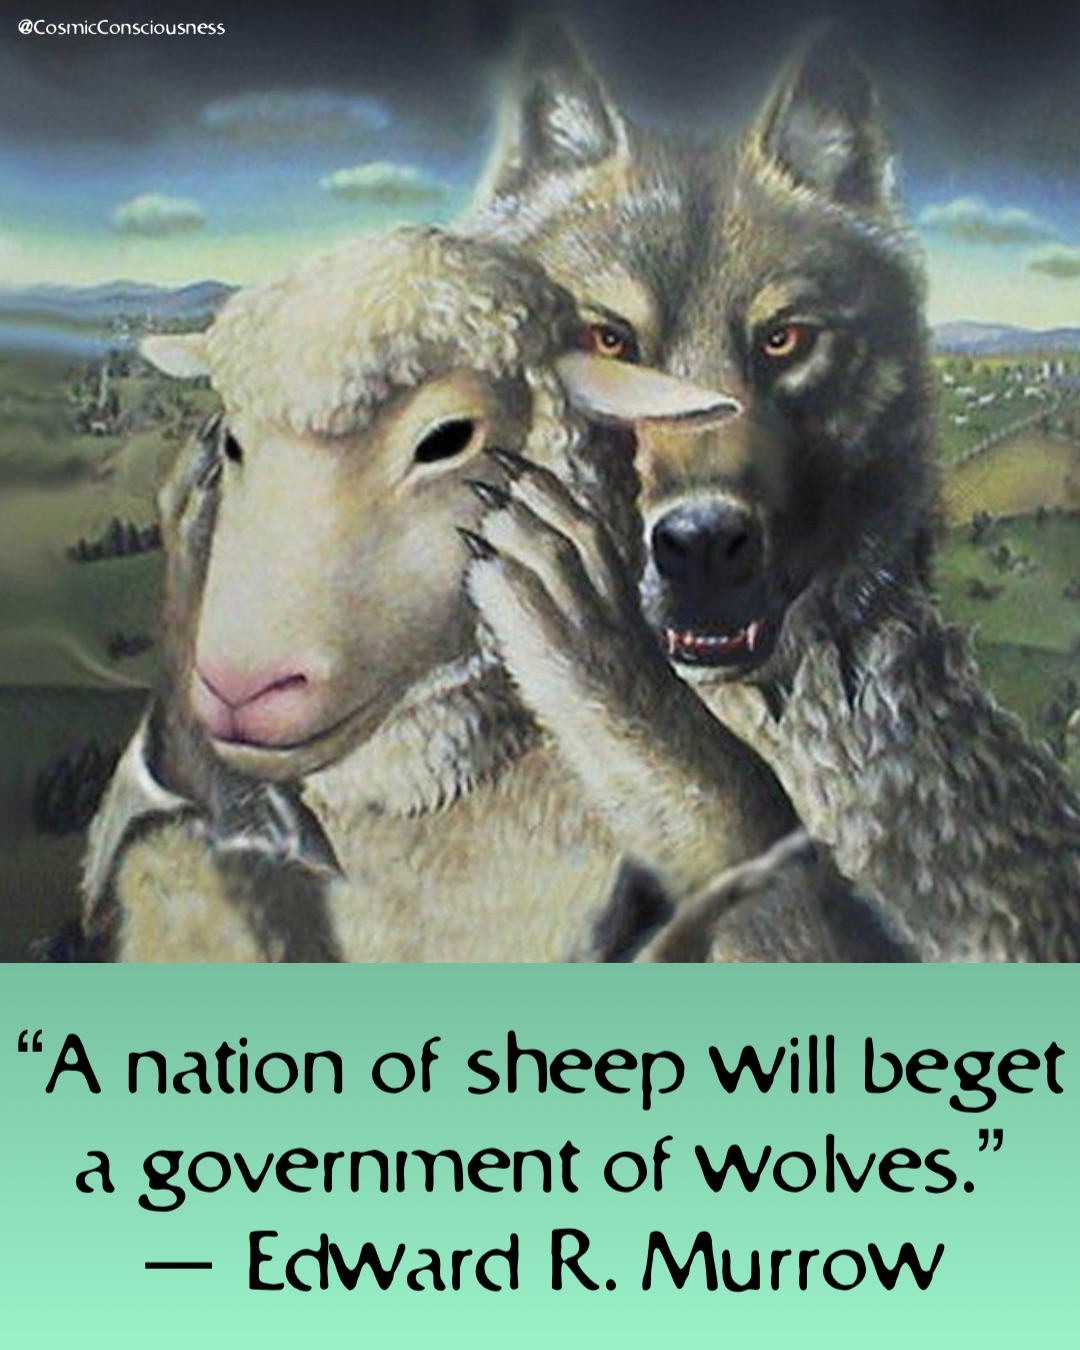 “A nation of sheep will beget a government of wolves.”
— Edward R. Murrow @CosmicConsciousness